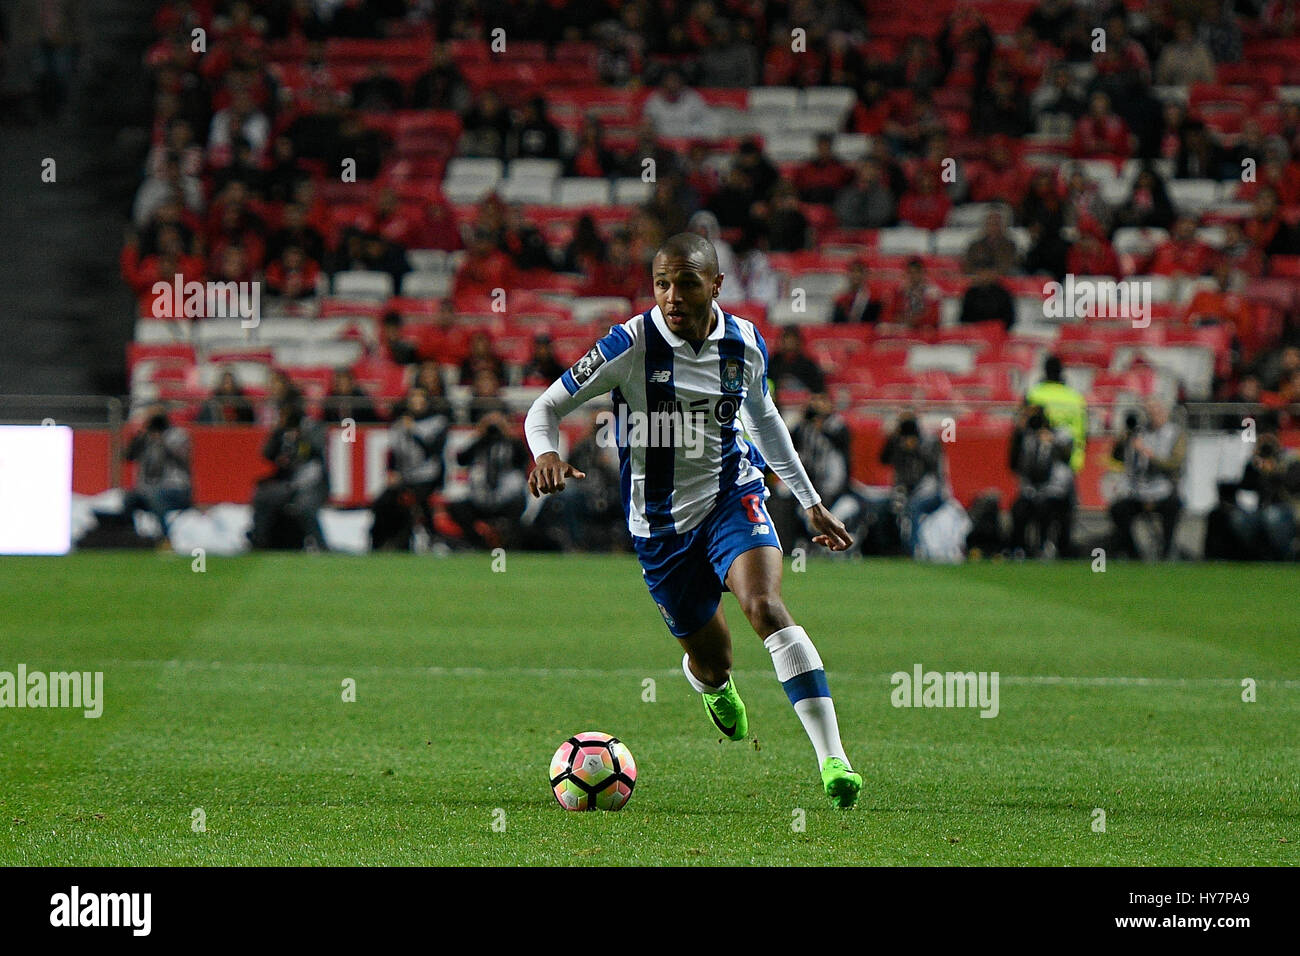 Portugal, Lisbon, April 1, 2017 -  FOOTBALL: PORTUGAL x FC PORTO - Yacine Brahimi #8 PortoÕs midfielder from Algeria in action during Portuguese First League football match between SL Benfica and FC Porto in Luz Stadium on April 1, 2017 in Lisbon, Portugal. Photo: Bruno de Carvalho / Alamy Stock Photo